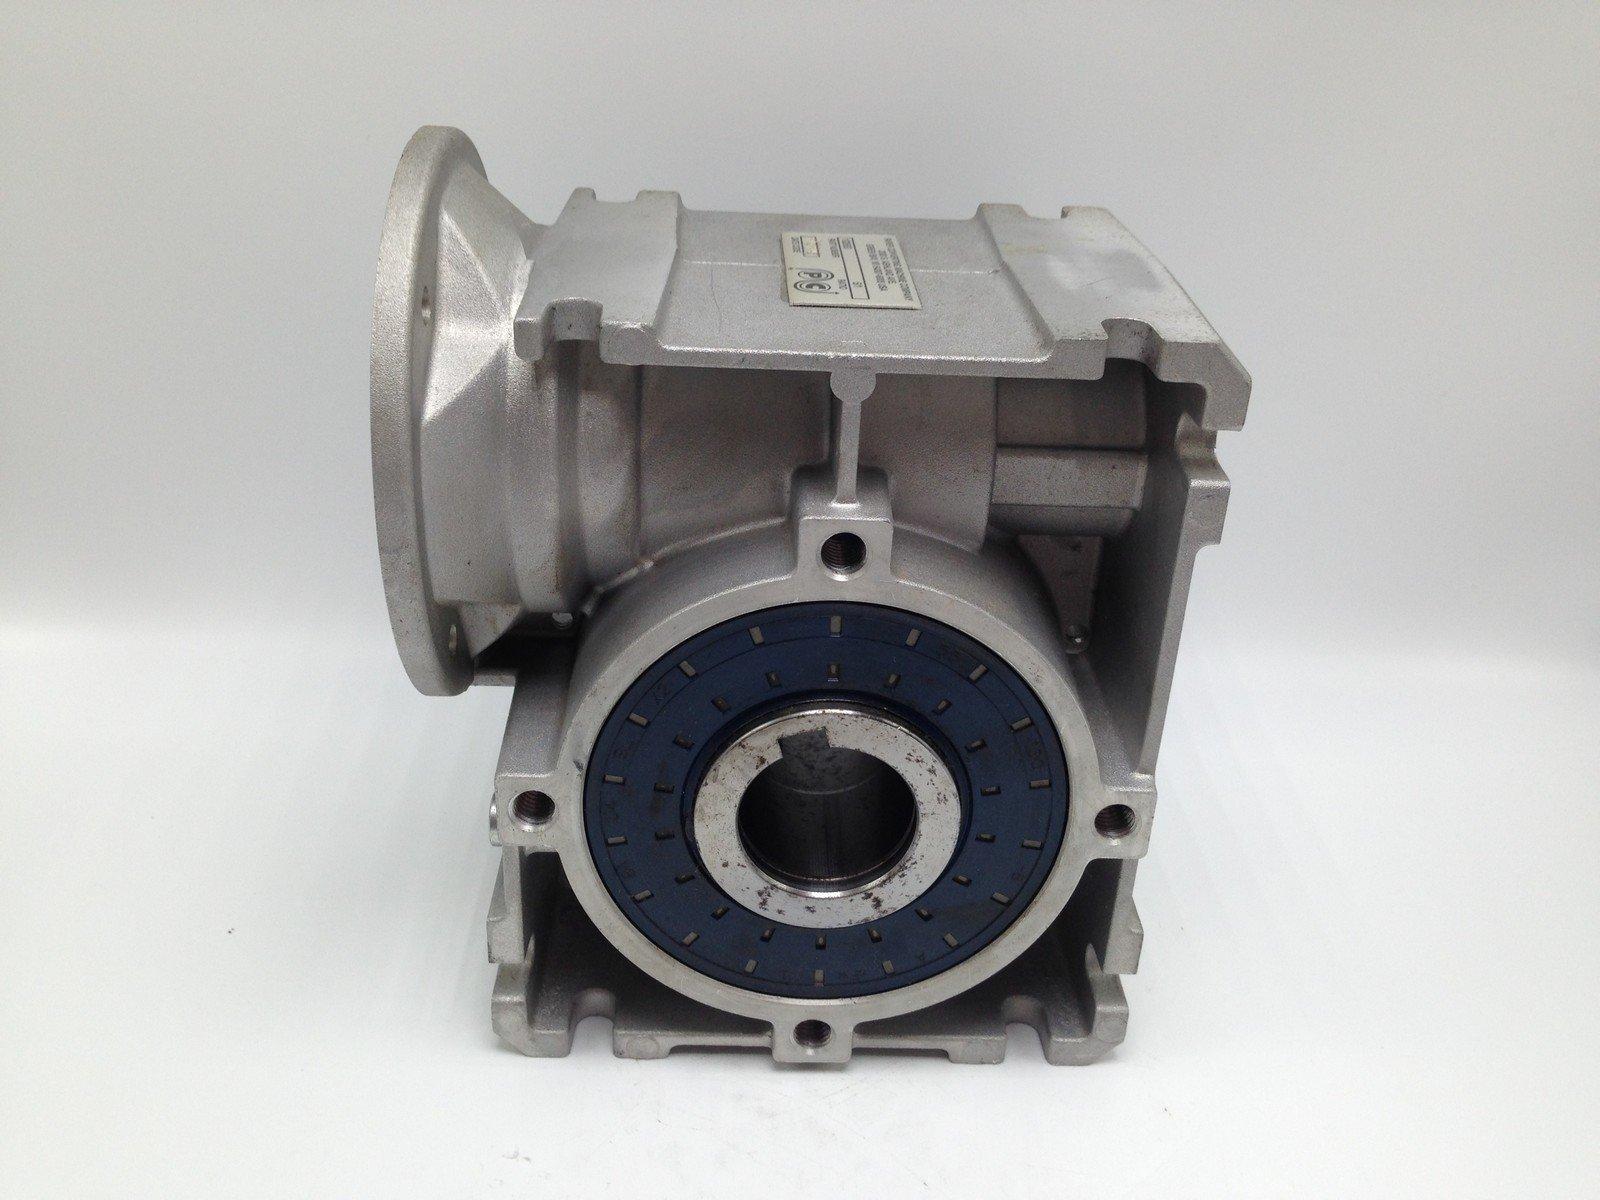  PAPER CONVERTING MACHINE COMPANY 102653 3 WAY GEARBOX, 5:1 RATIO, P/N 102653 